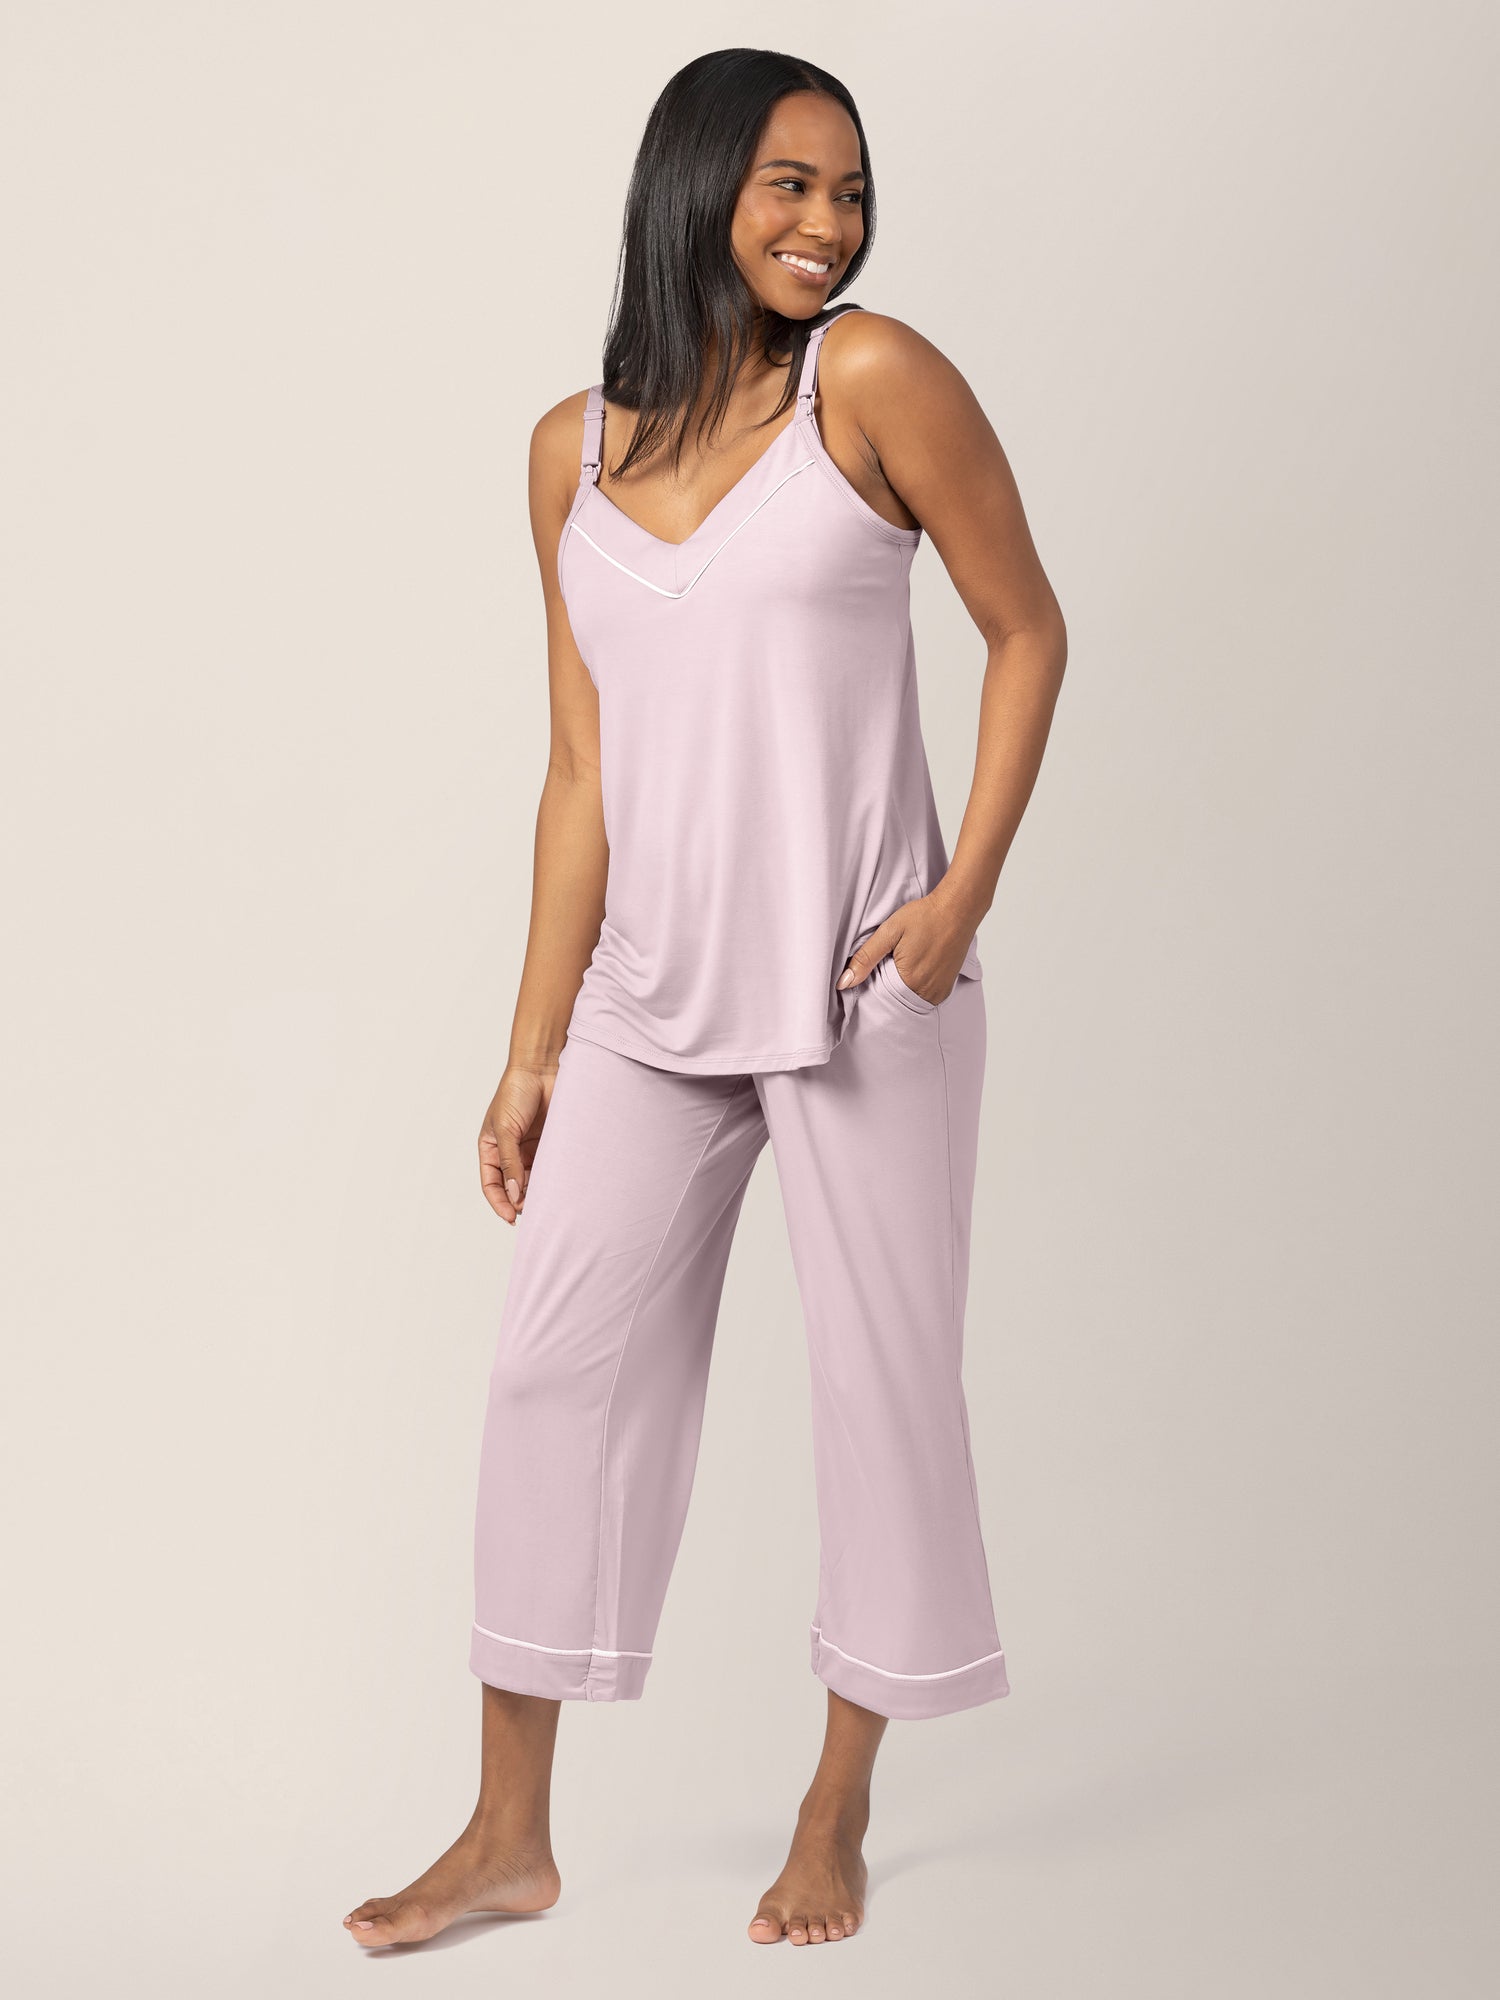 Front view of model wearing Clea Bamboo Nursing Tank & Capri Pajama Set in Lilac, with hands in pockets